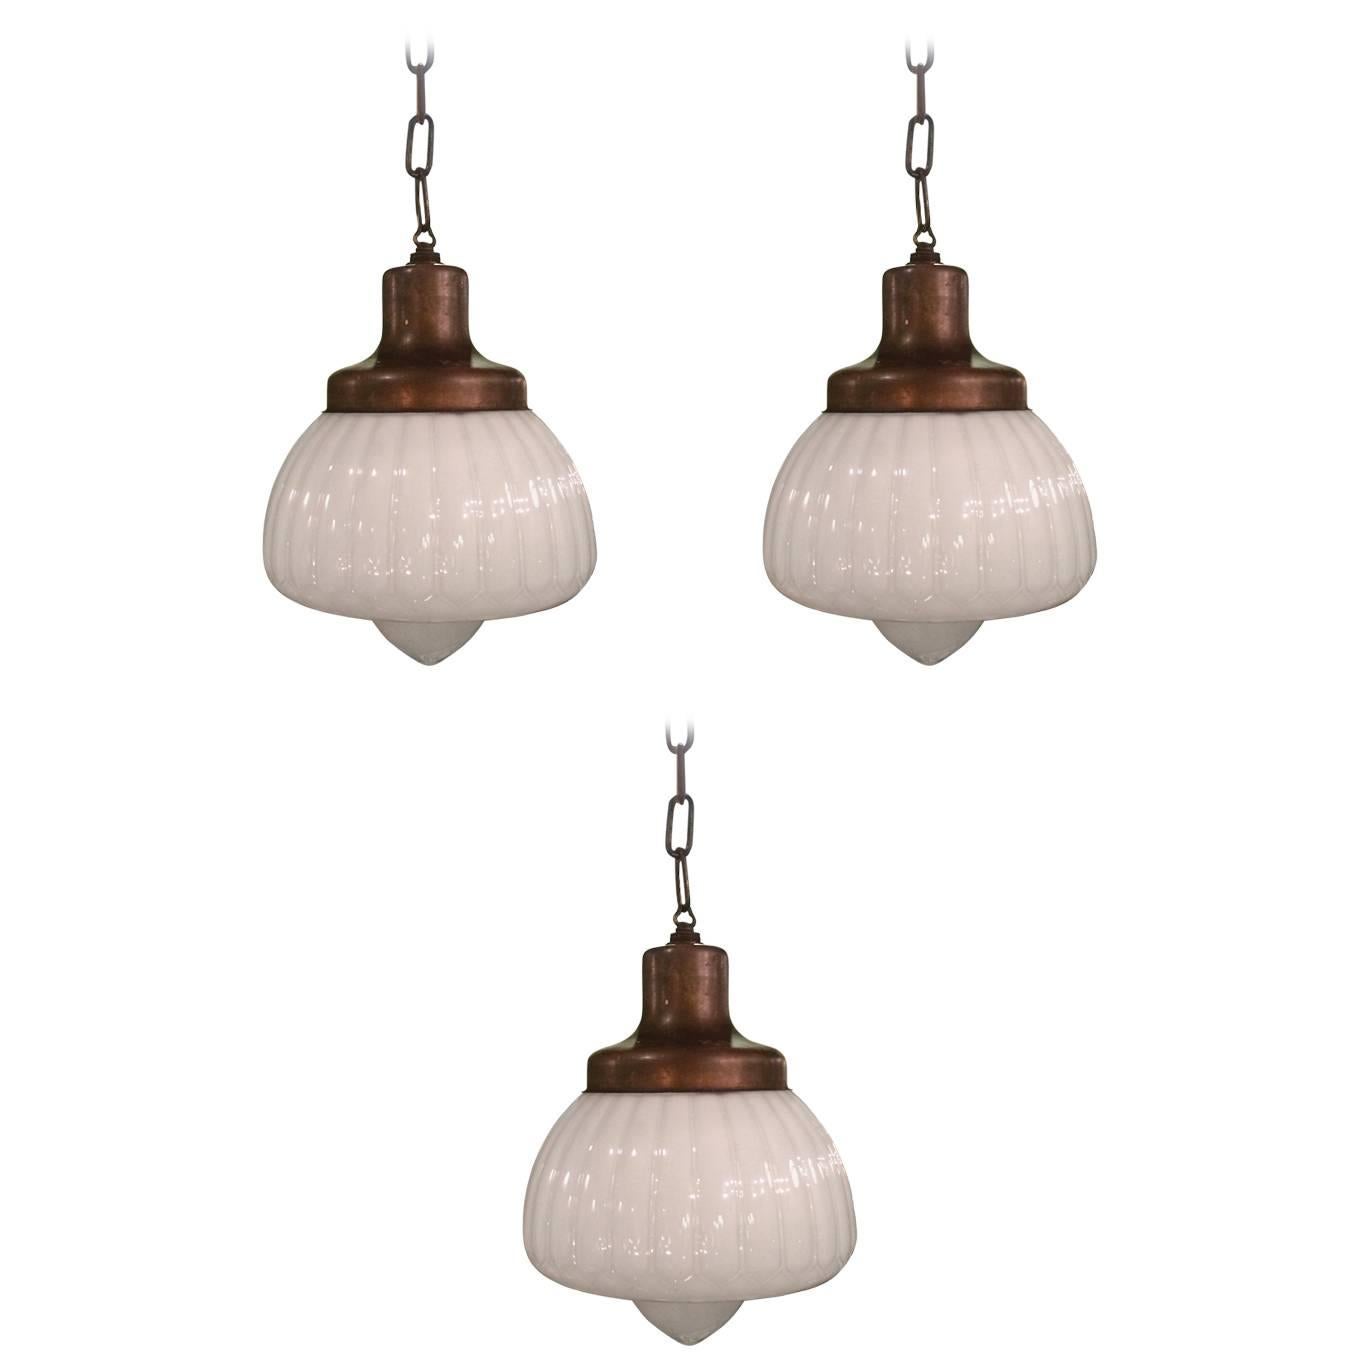 Set of Three Fancy Fluted Milk Glass Library, Pharmacy Pendant Lights